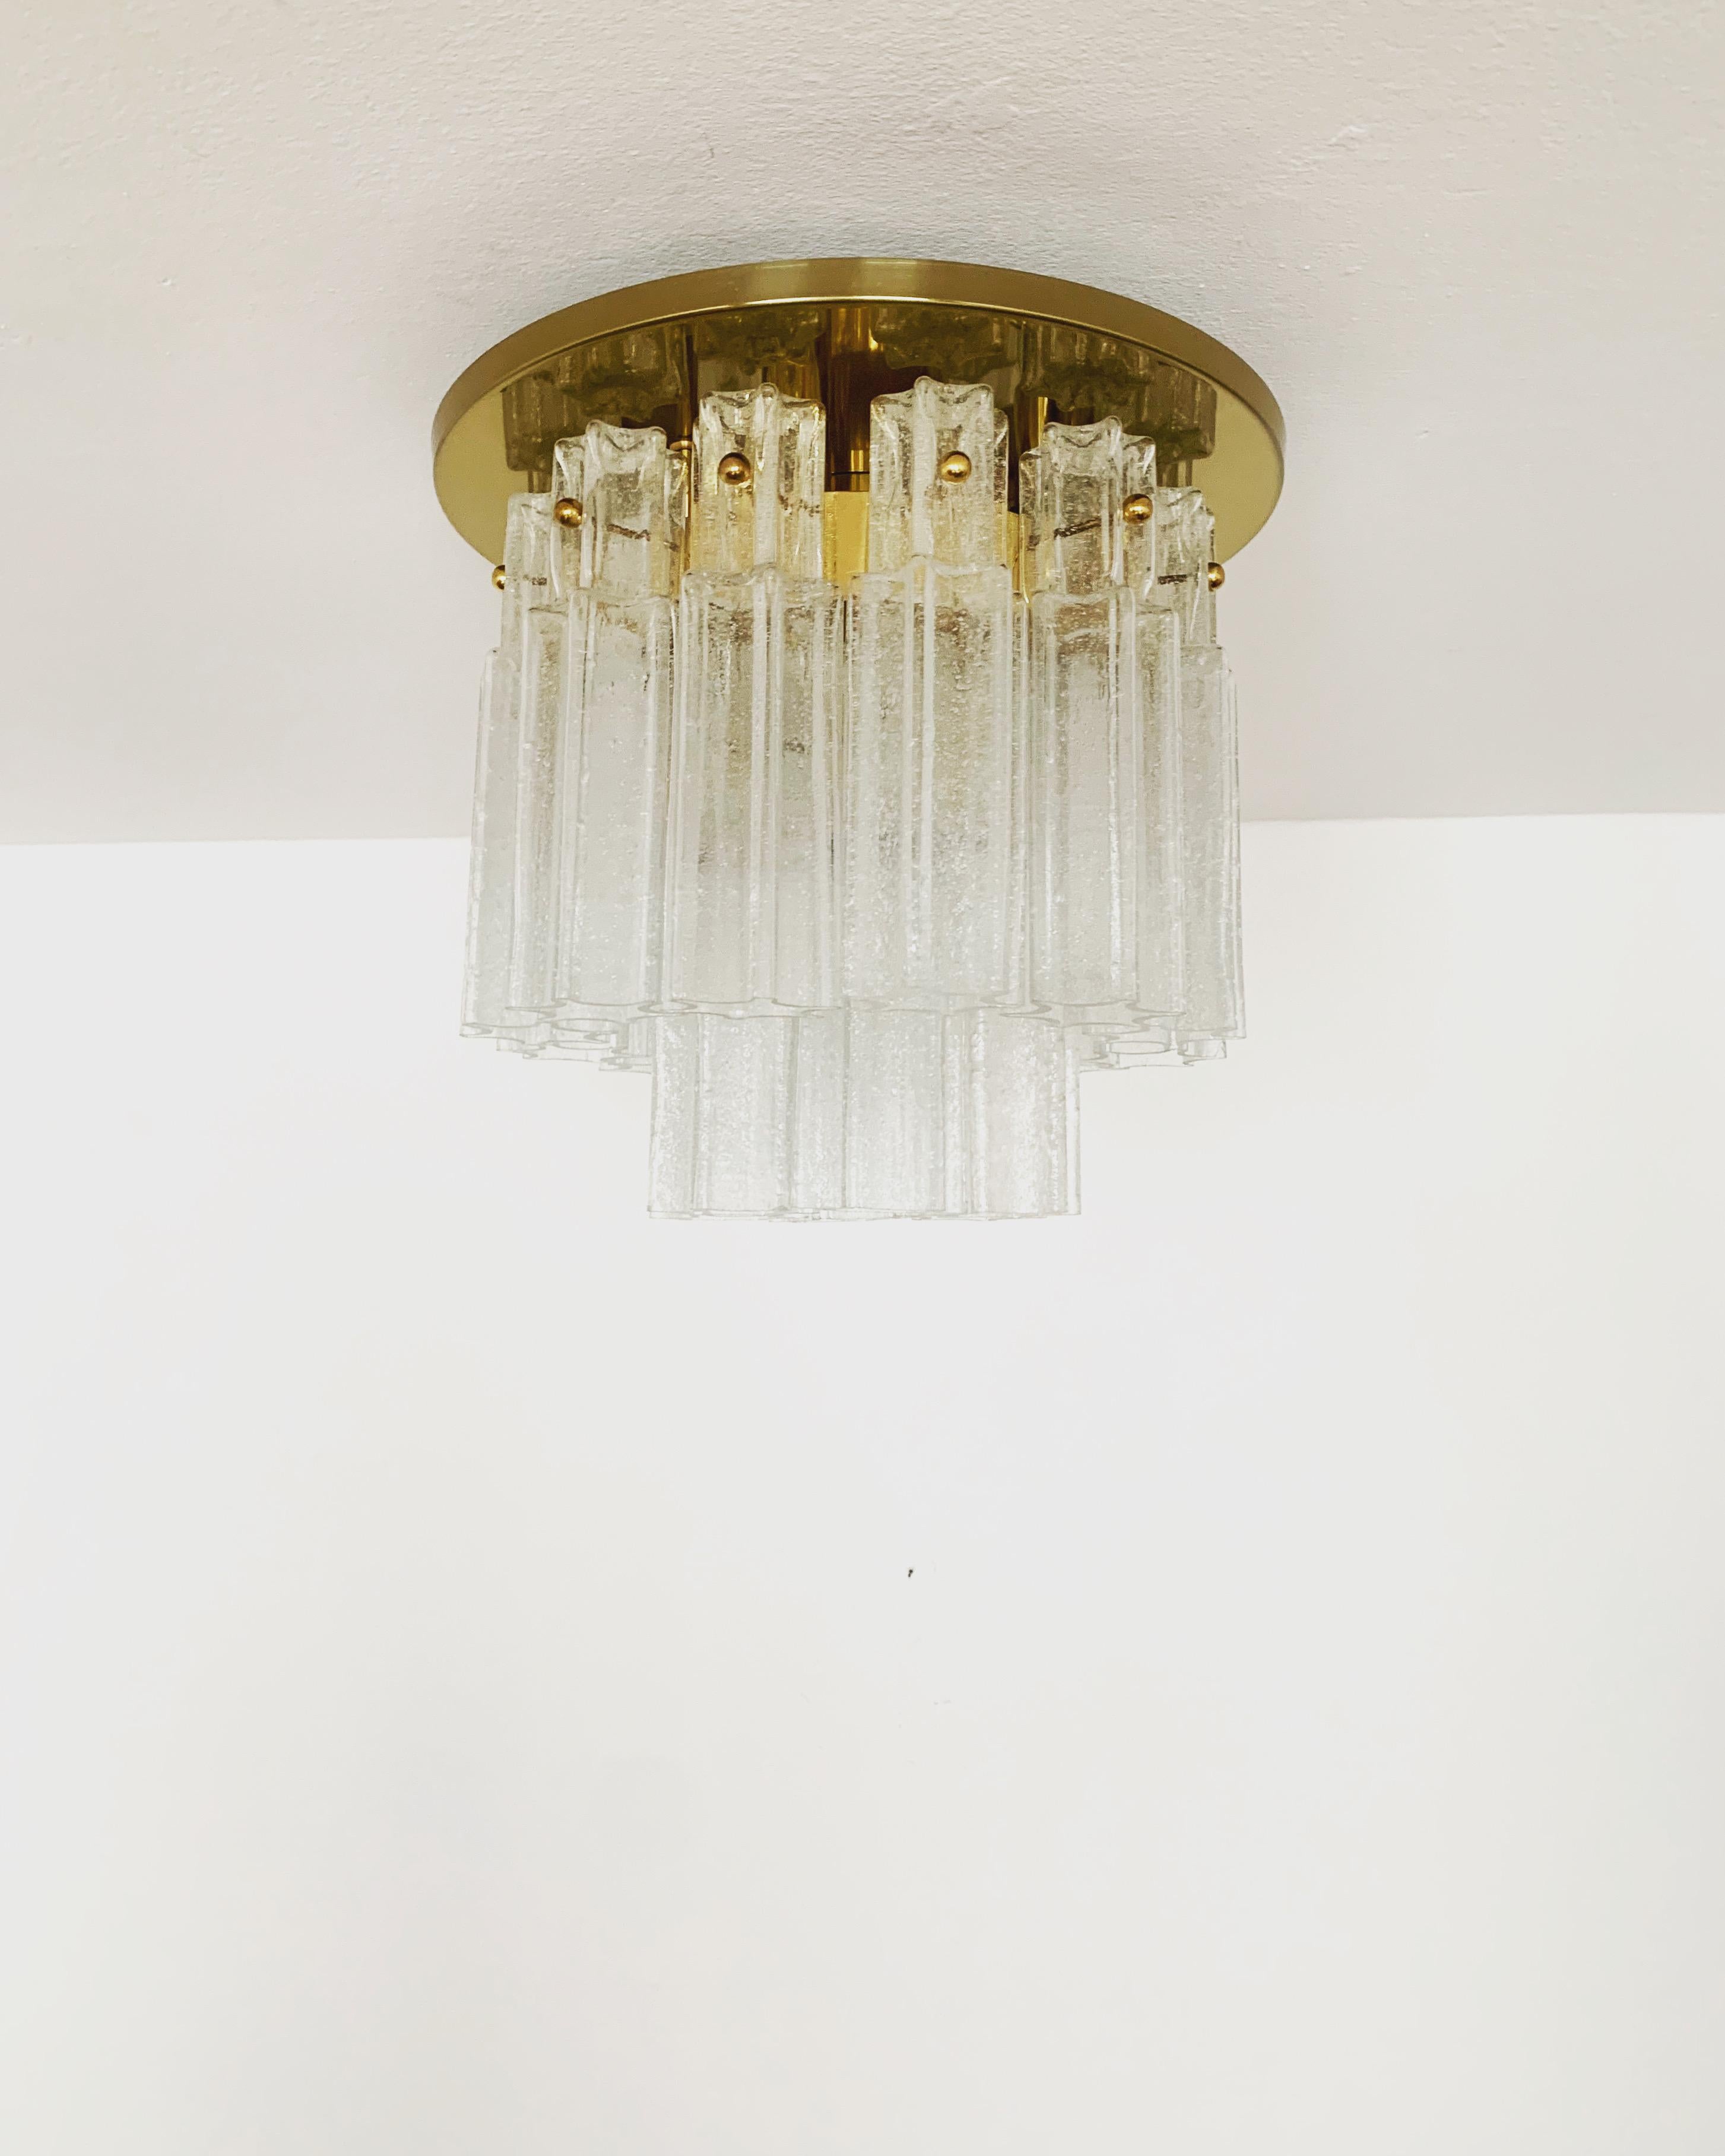 Impressive ice glass ceiling lamp from the Limburg glassworks around 1960.
The 18 glasses are arranged on 2 levels.
Very high quality processing.
The lamp spreads a spectacular play of light.

Condition:

Very good vintage condition with